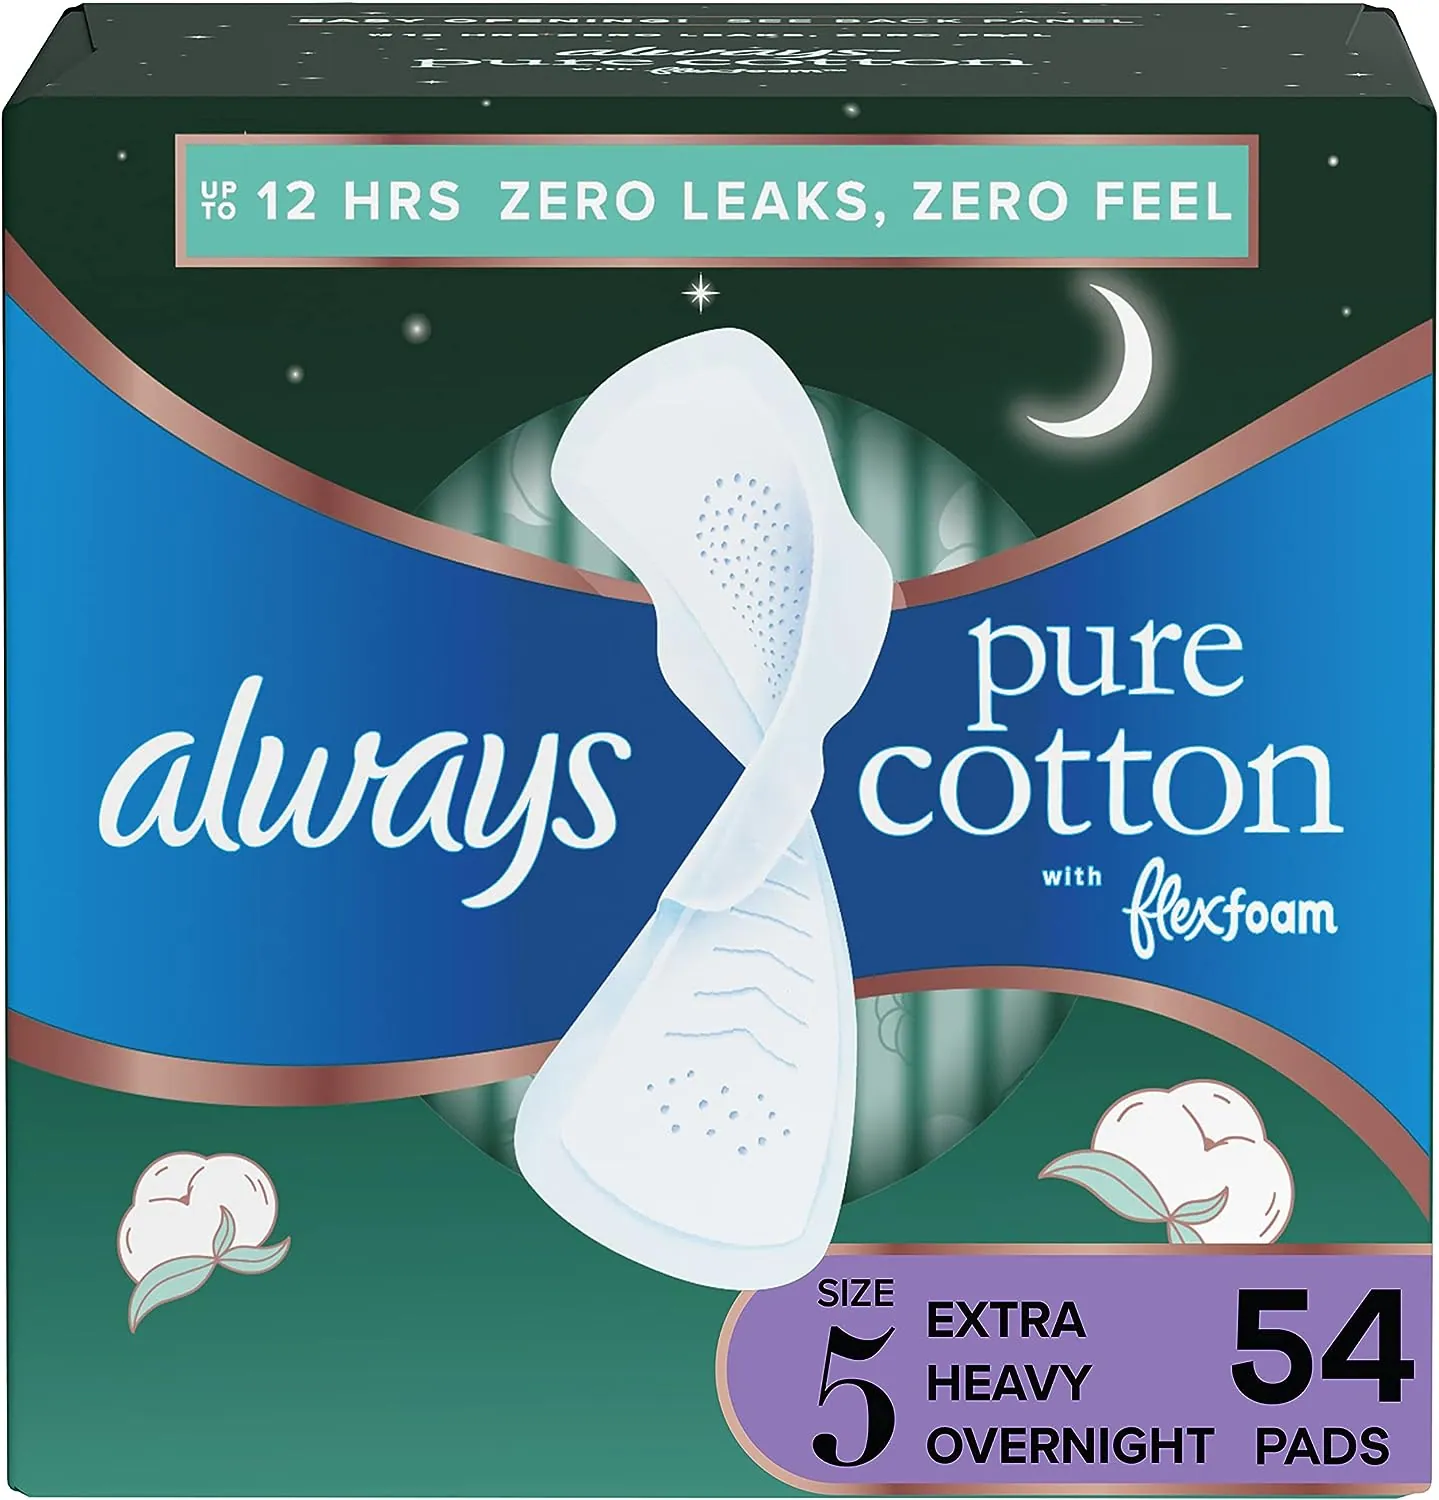 always pure cotton maternity pads